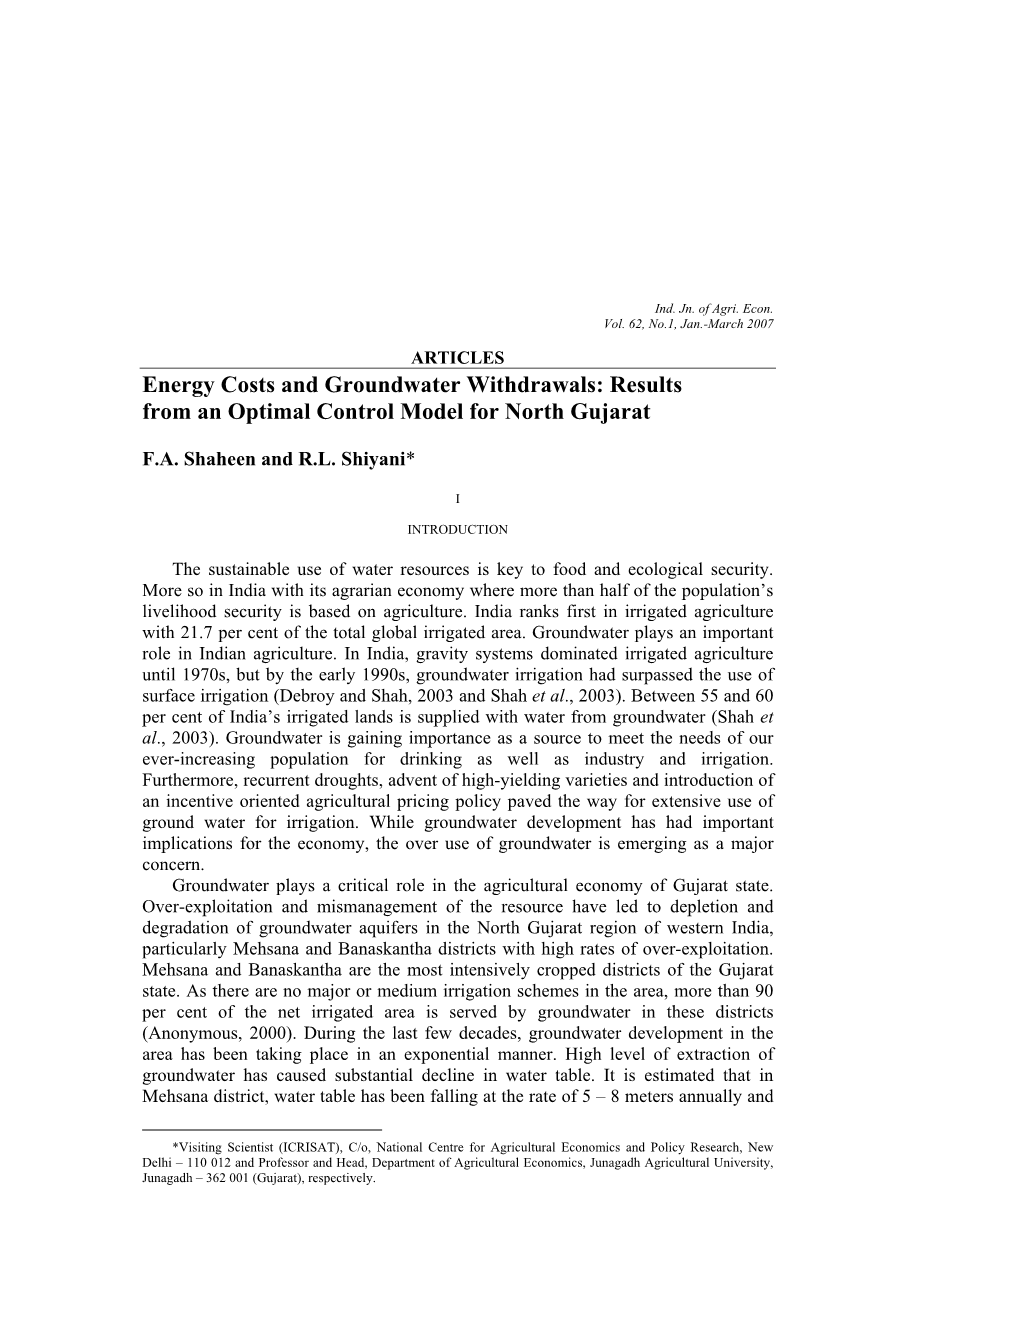 Results from an Optimal Control Model for North Gujarat